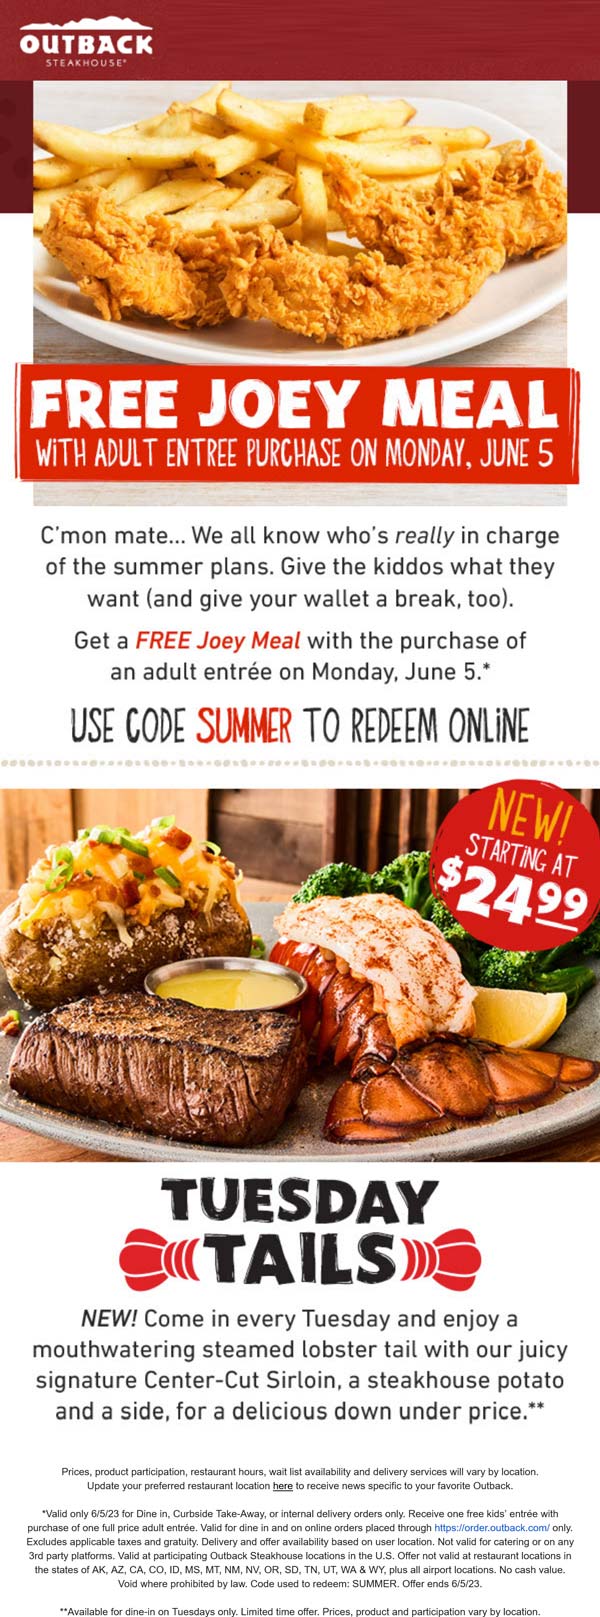 Outback Steakhouse restaurants Coupon  Free kids meal with yours Monday at Outback Steakhouse #outbacksteakhouse 